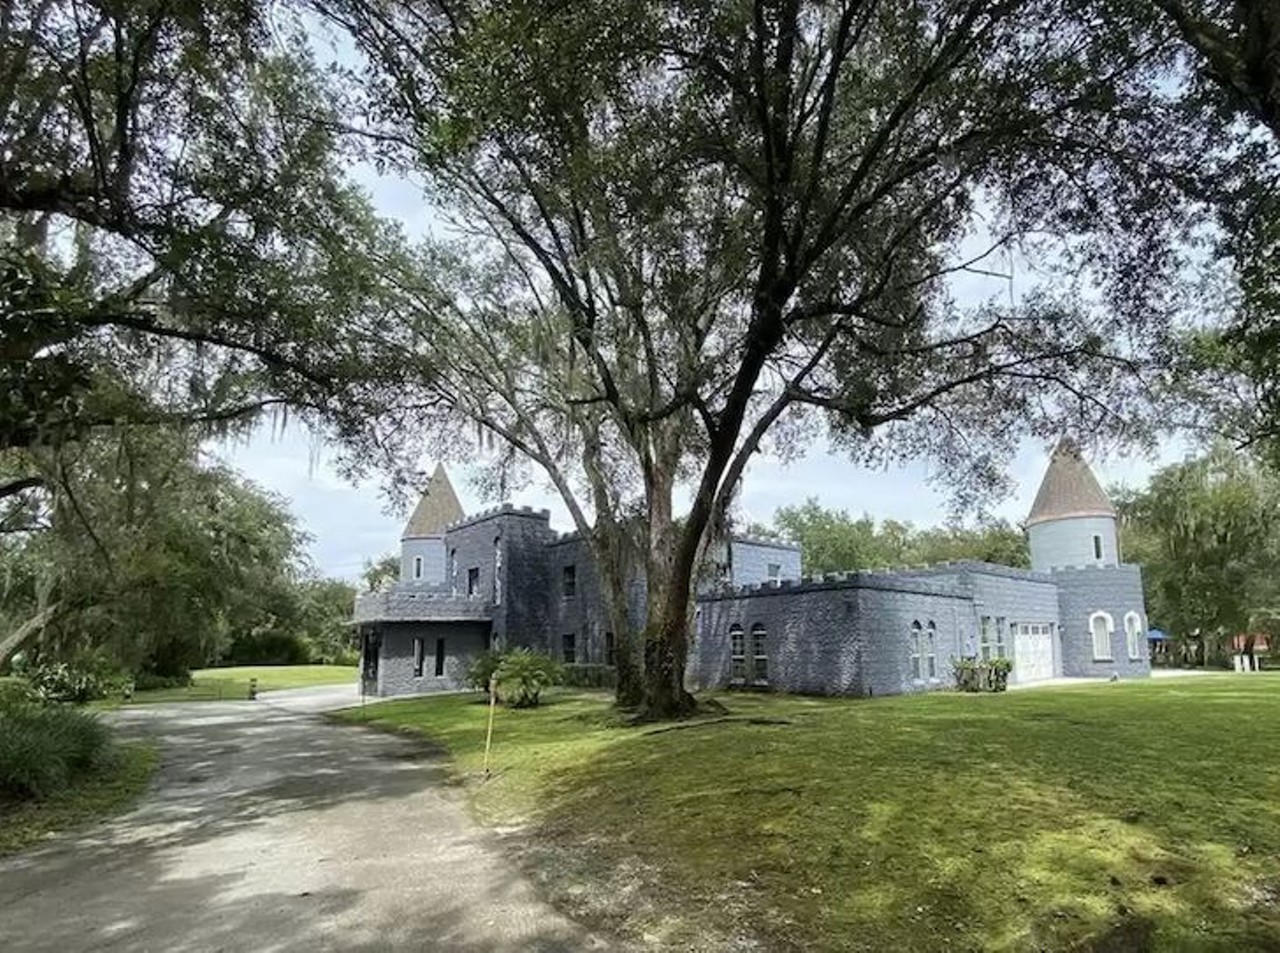 A castle in Kissimmee fetches $1.1 million offer